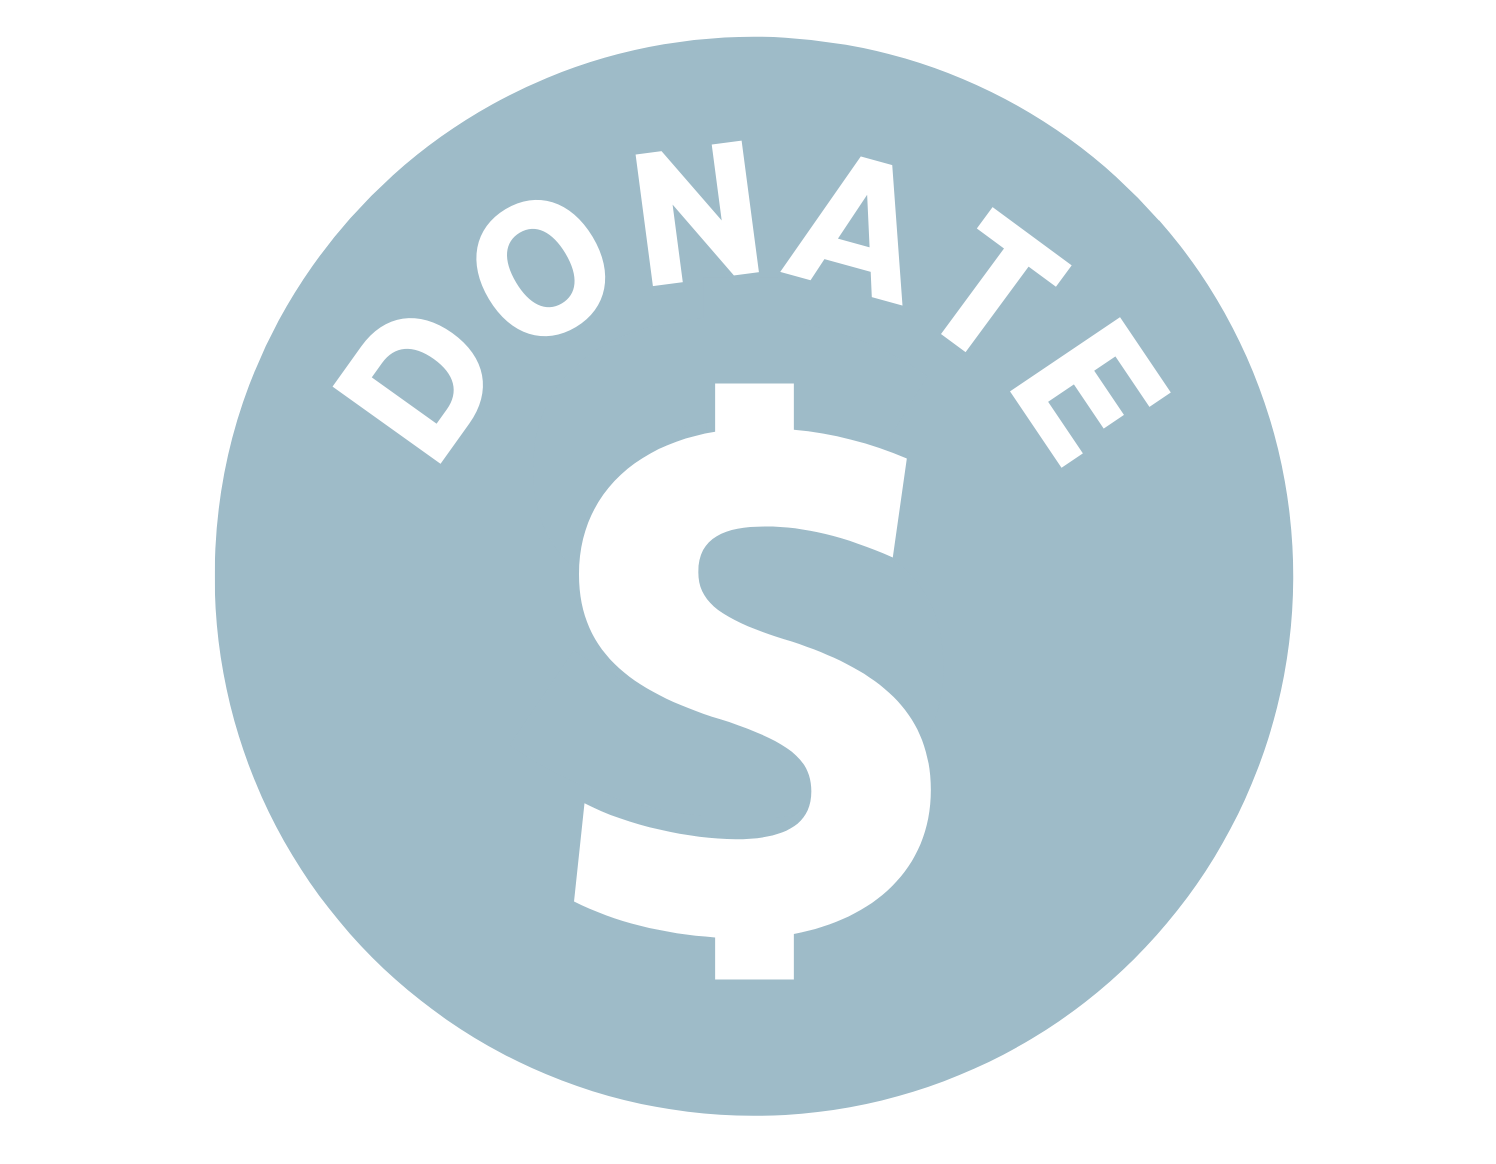 Donation sign - Roblox